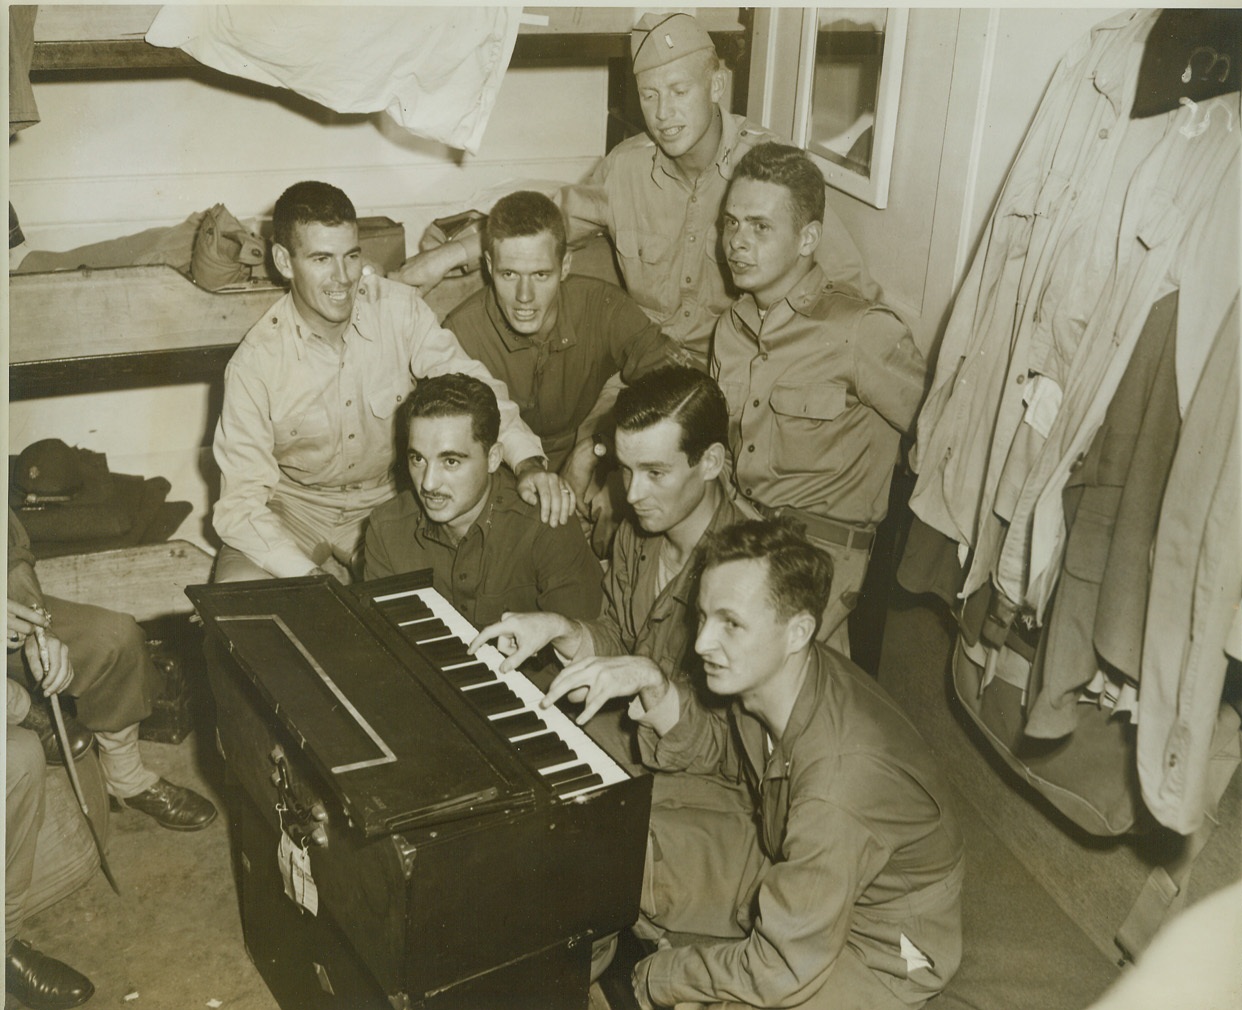 HARMONY BELOW DECKS, 10/27/1943. AT SEA – The boys are giving their version of Pistol Packin’s Mama aboard a troop transport bound for a South Pacific port. Left to right, standing: Lieutenants J. R. Ryan, Los Angeles, Calif.; N. W. Alexander, Dallas, Tex.; C. H. Parks, Oklahoma City, Okla.; W. E. O’Donovan, Baltimore, MD. Front Row: A. G. Tsimpides, Birmingham, Ala.; J. L. McHenry, Boston, Mass.; and P. L. Gressman, Buffalo, N. Y. Credit: OWI Radiophoto by Thomas Shafer from ACME;